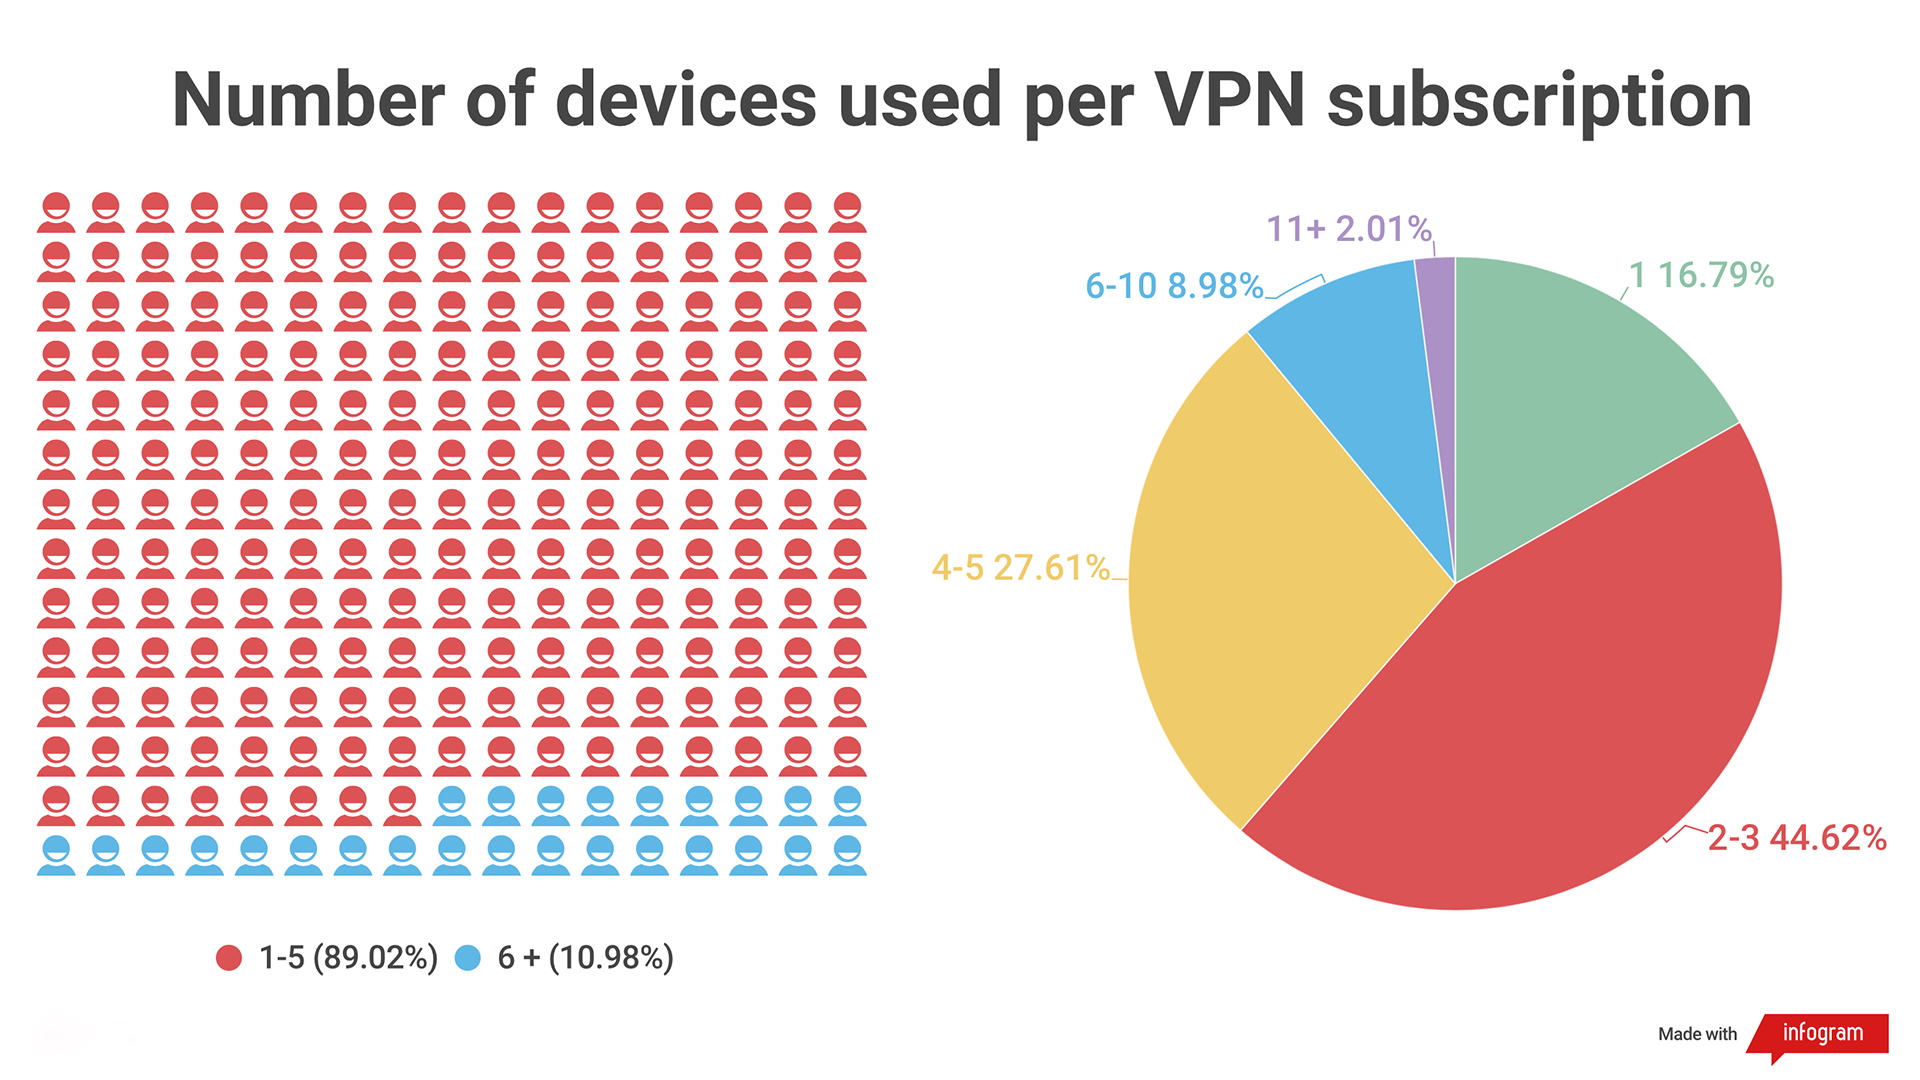 Two infographics showing the number of devices used per VPN subscription